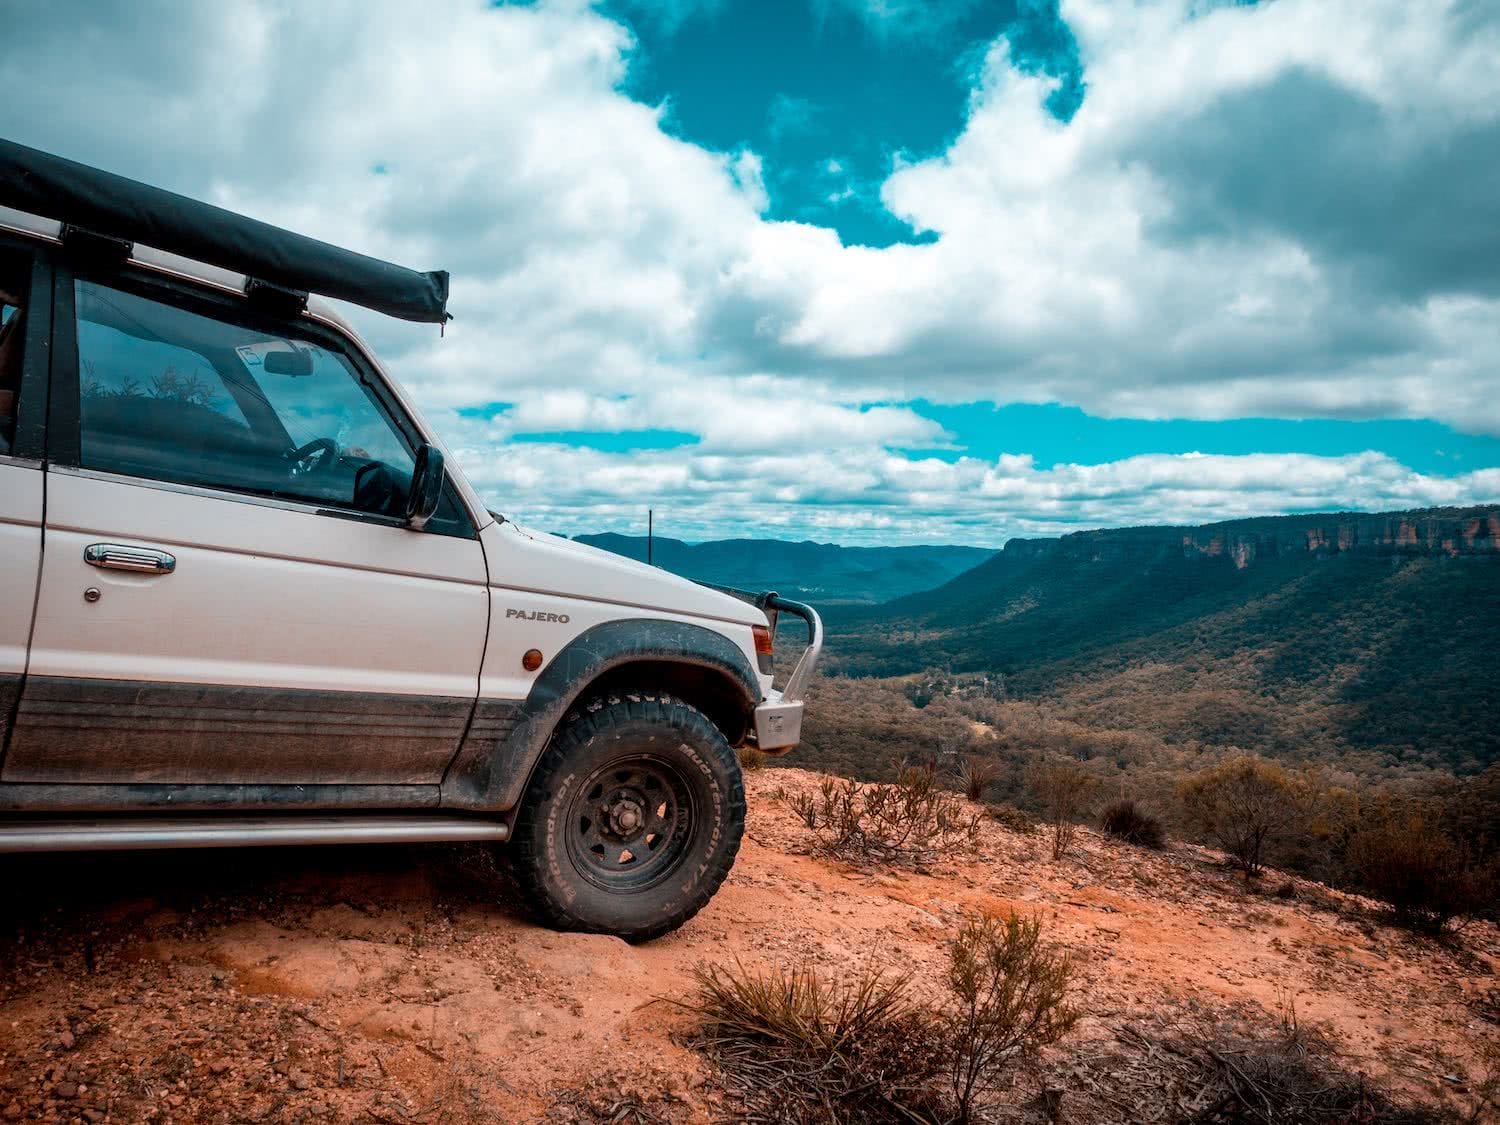 Luke mallinson, pajero, car, wolgan valley, 4wd, view, valley, blue mountains, how to prepare your car for a summer road trip